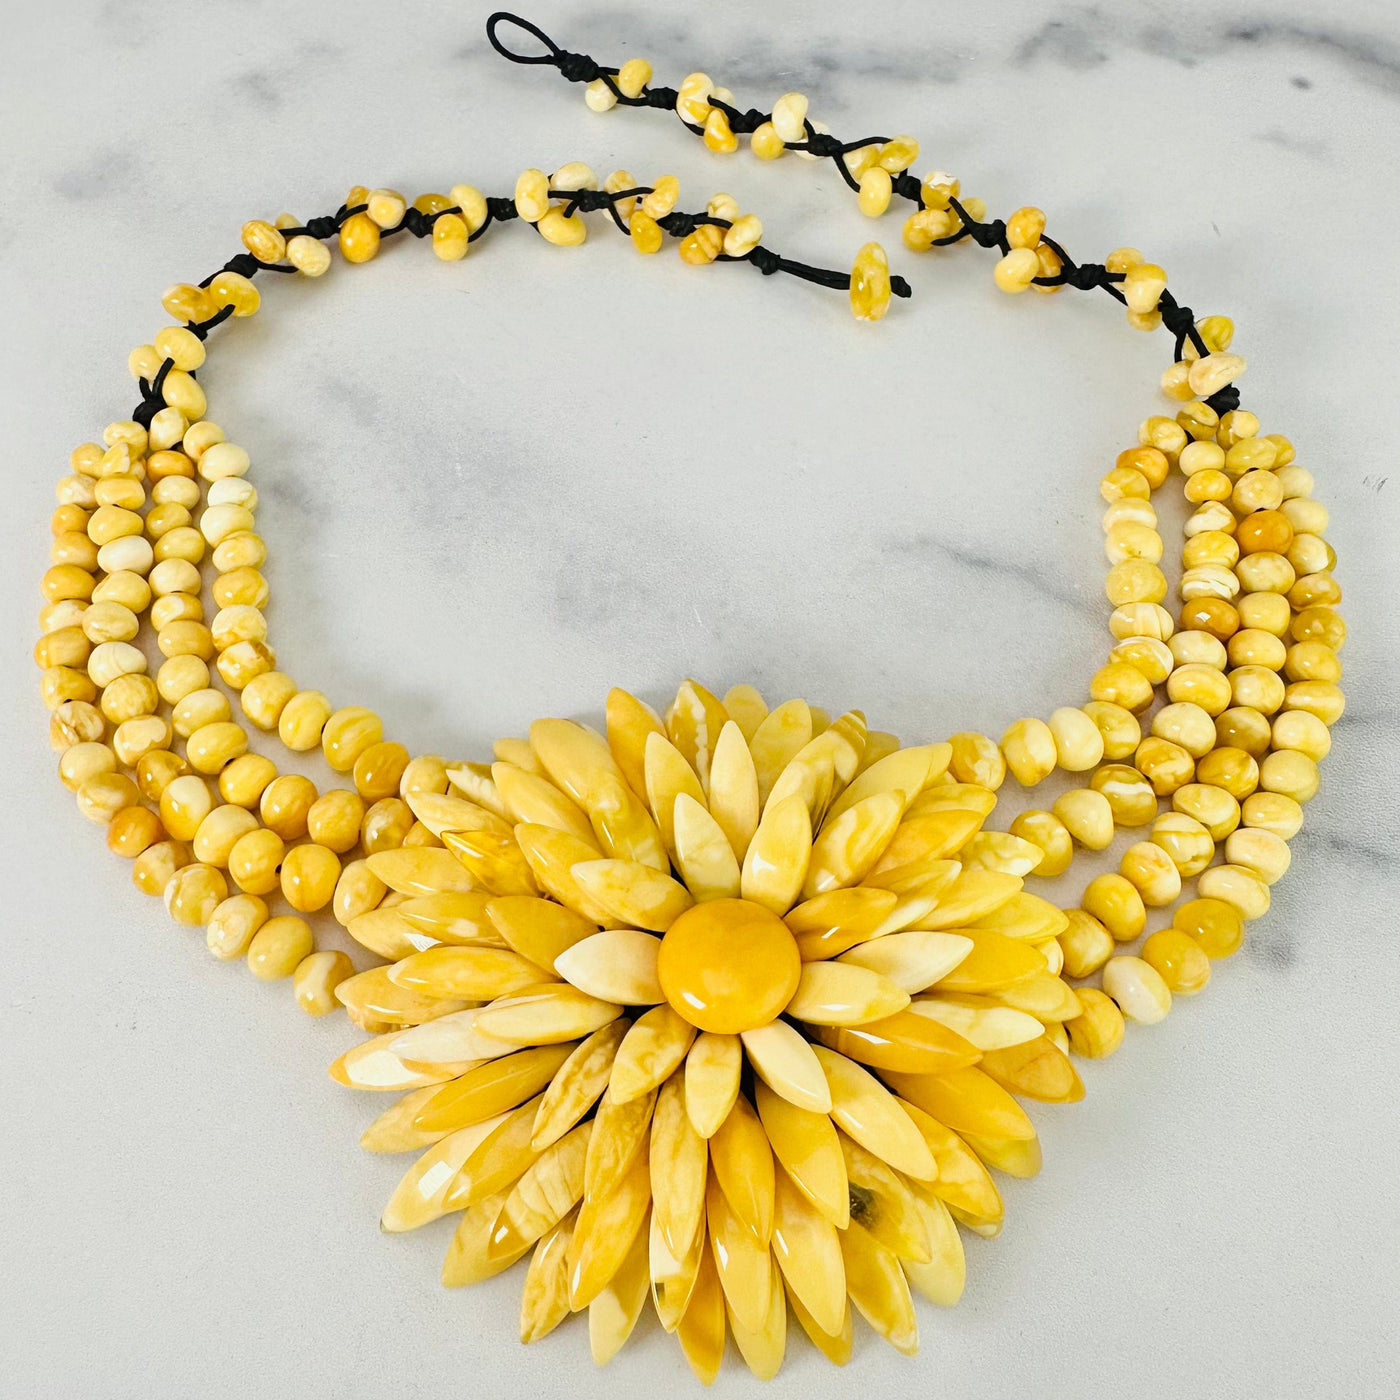 Frontal view of Yellow Baltic Amber Beaded Flower Necklace shown on a marble surface with closure undone.